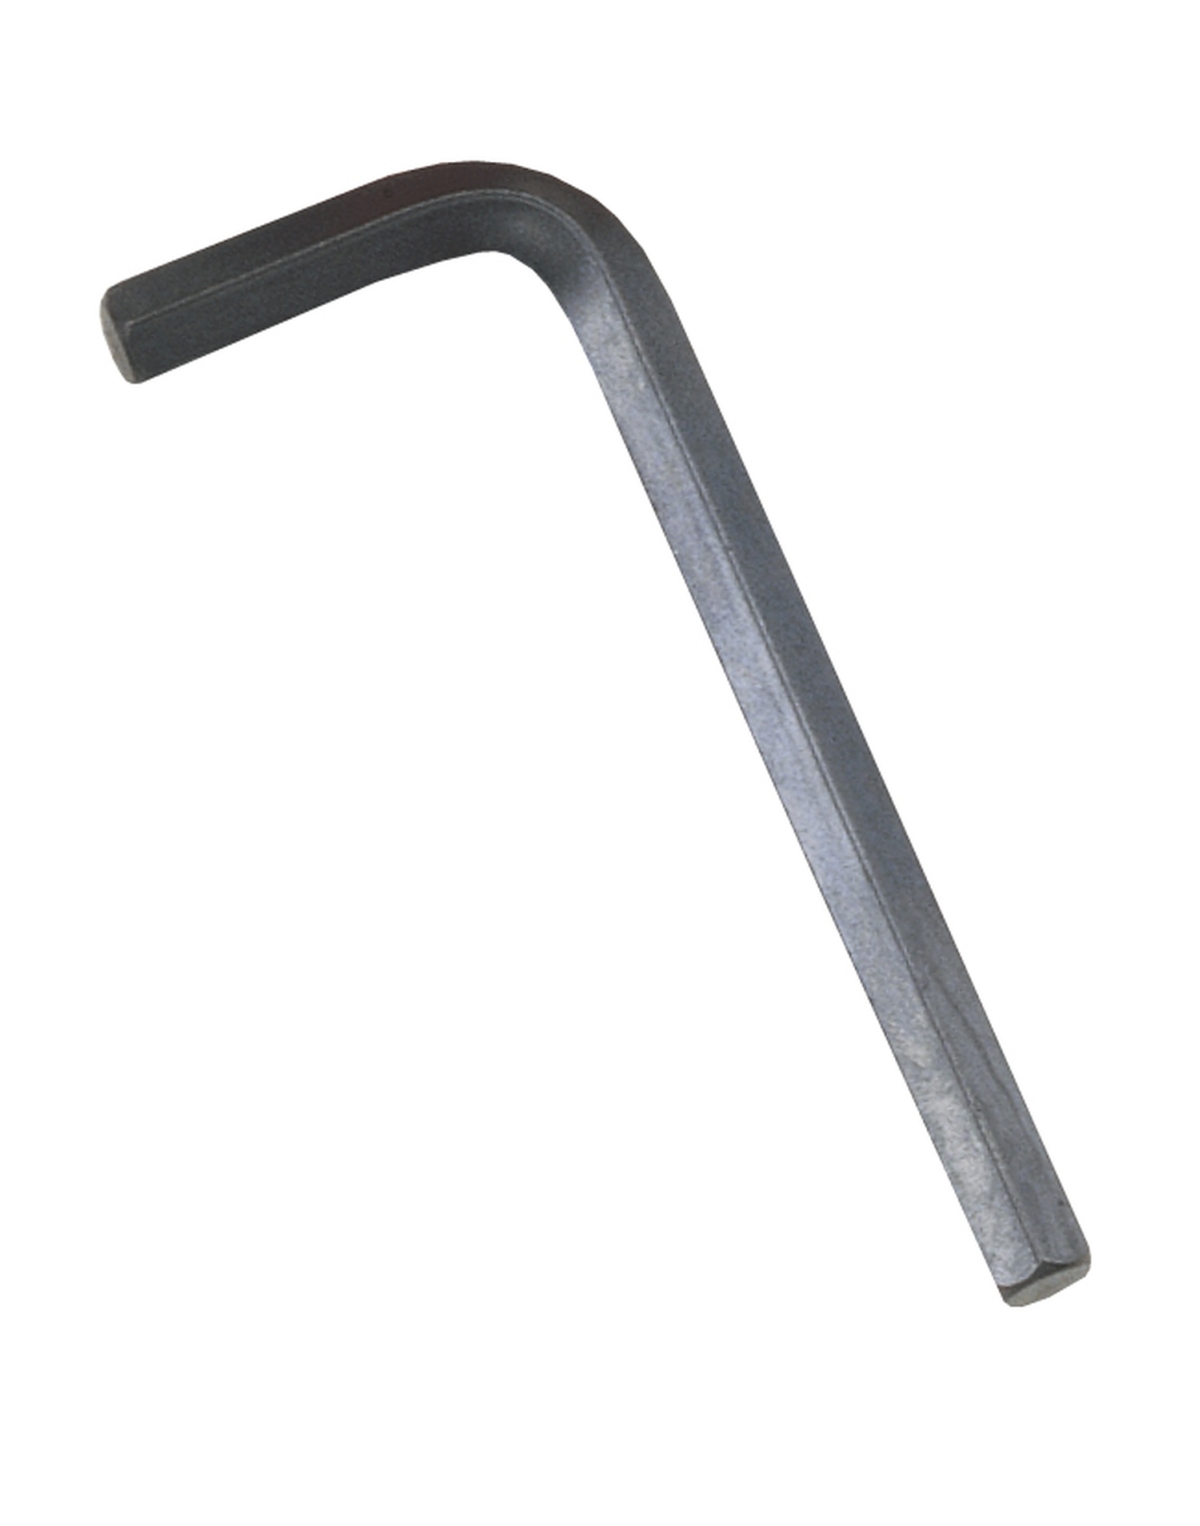 7mm L-Shaped Hex Wrench 93mmL